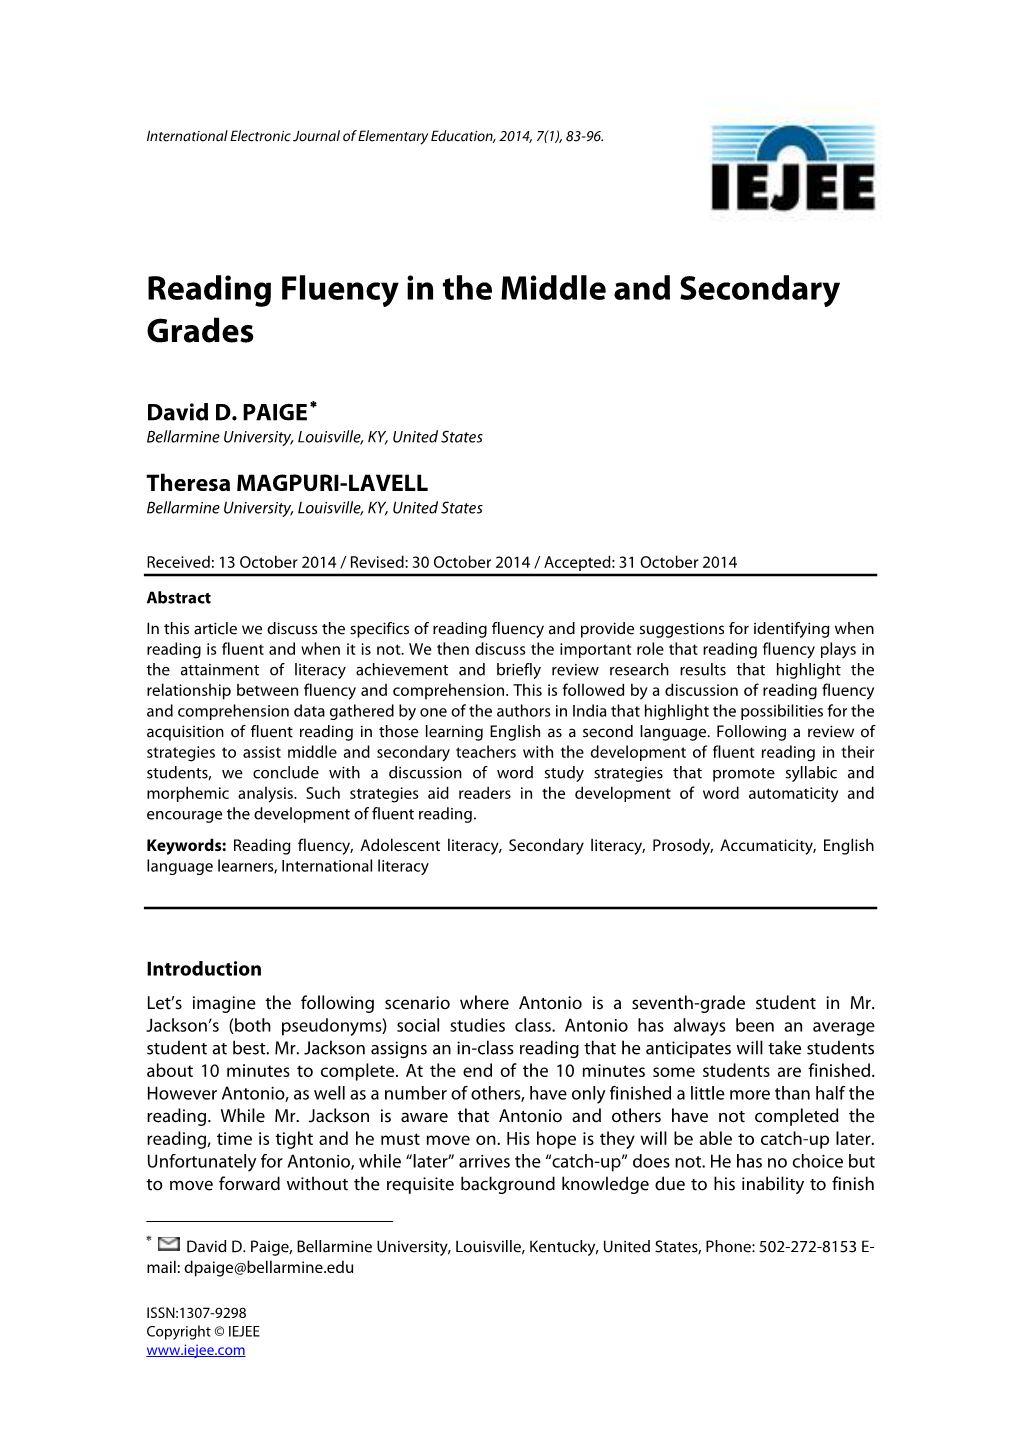 Reading Fluency in the Middle and Secondary Grades